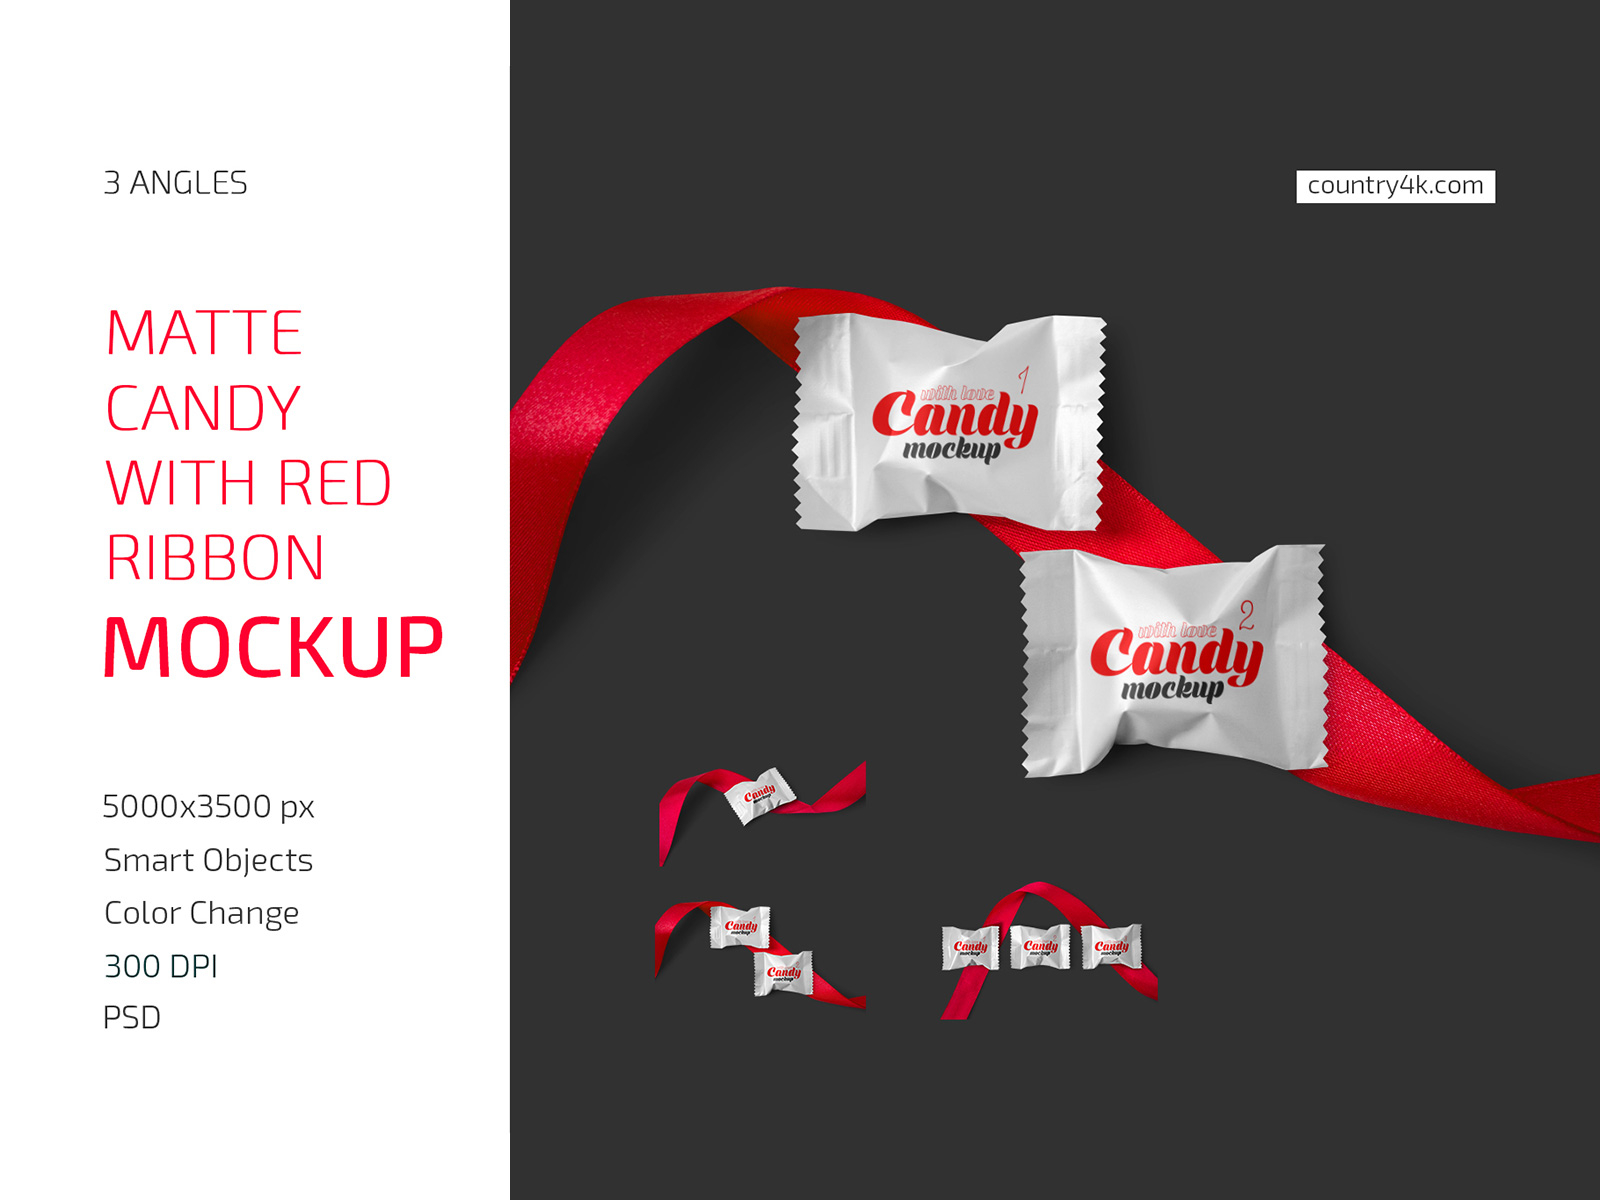 Download Matte Candy With Red Ribbon Mockup Set By Country4k On Dribbble